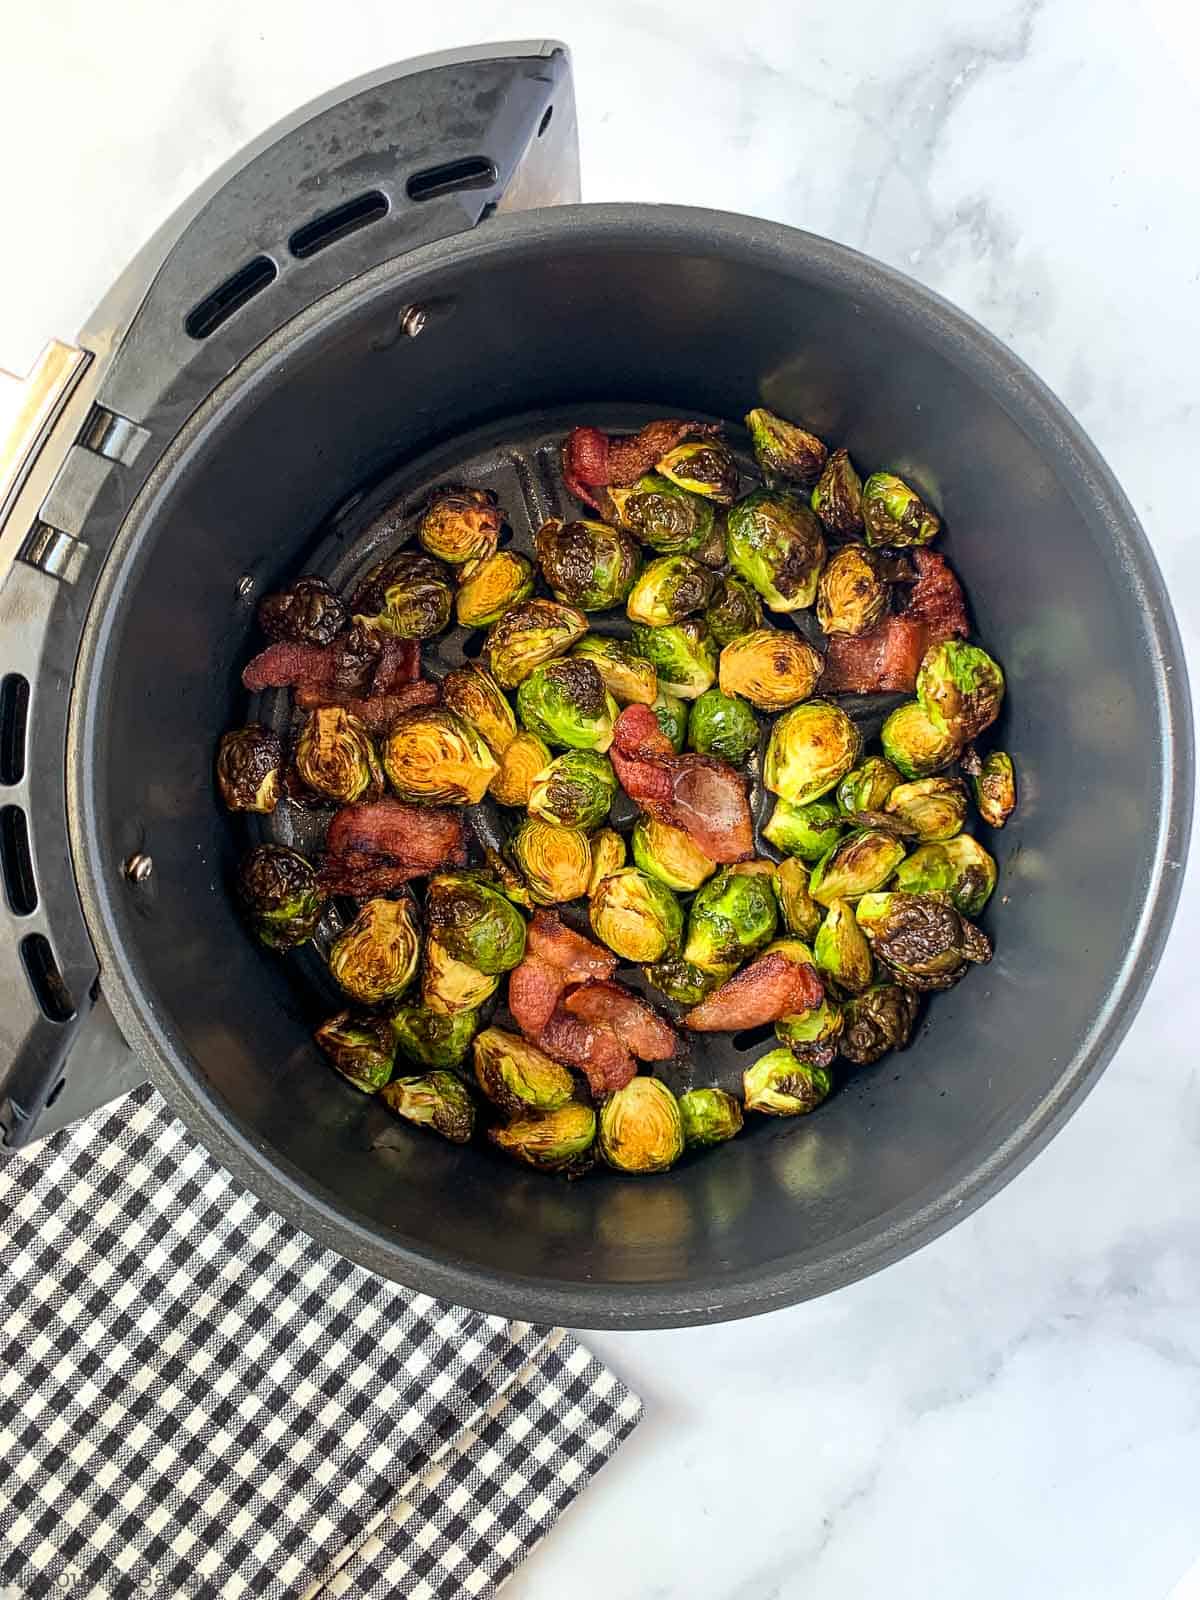 Cooked Brussels Sprouts in air fryer basket